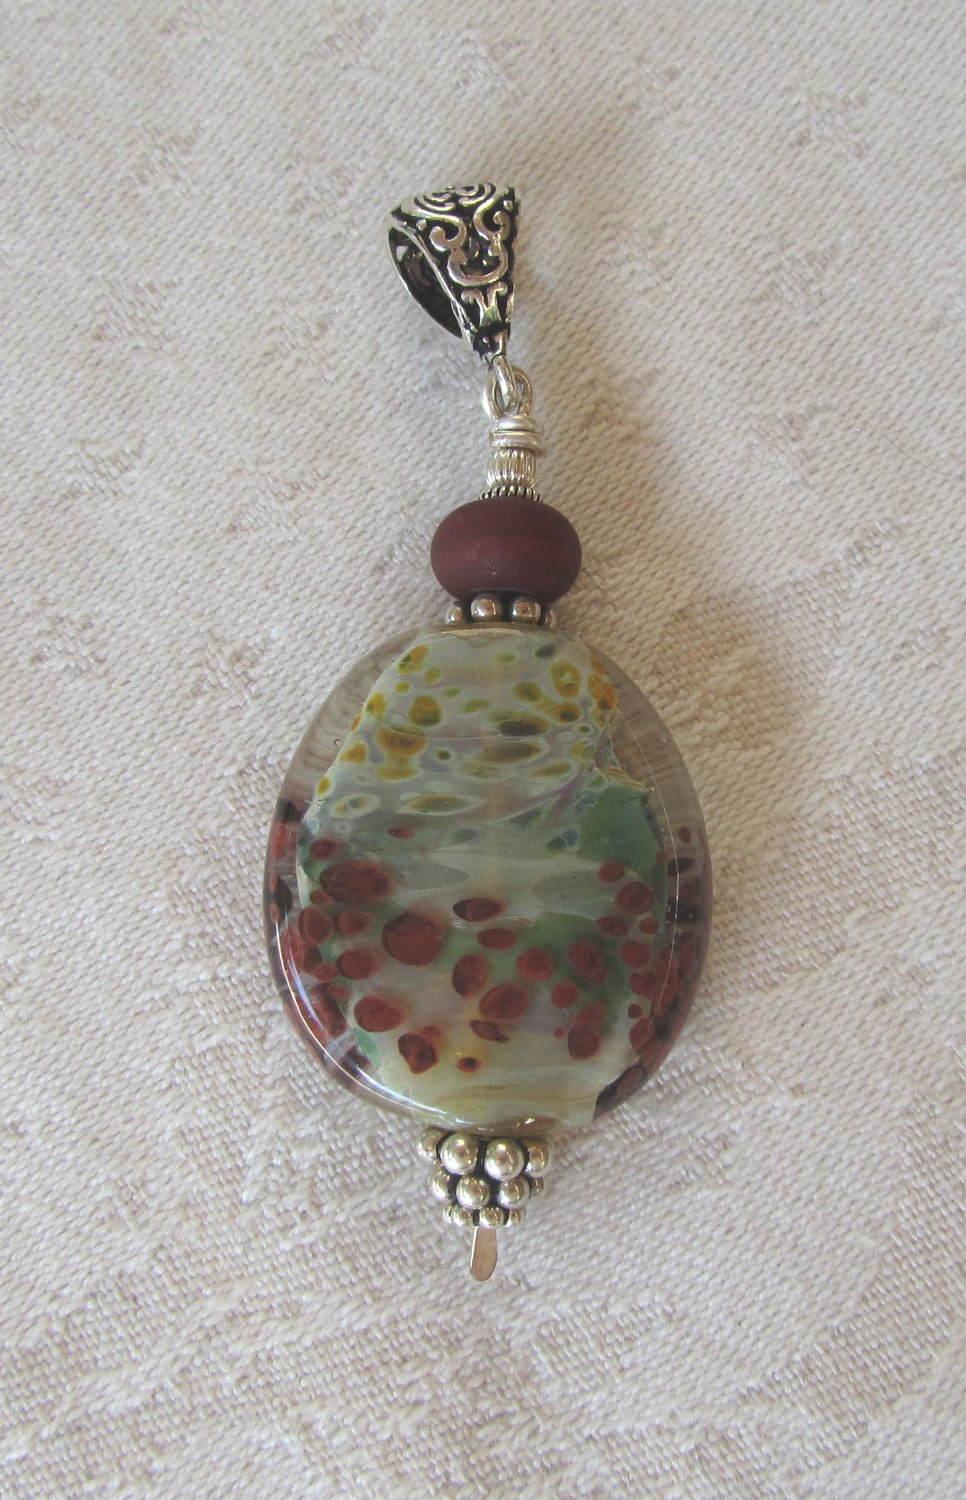 Organic Green and Brown Glass Pendant, Distinctive Artisan Bead That Mimics Nature, Lots of Sterling Accents, Large Pendant - JemsbyJoan